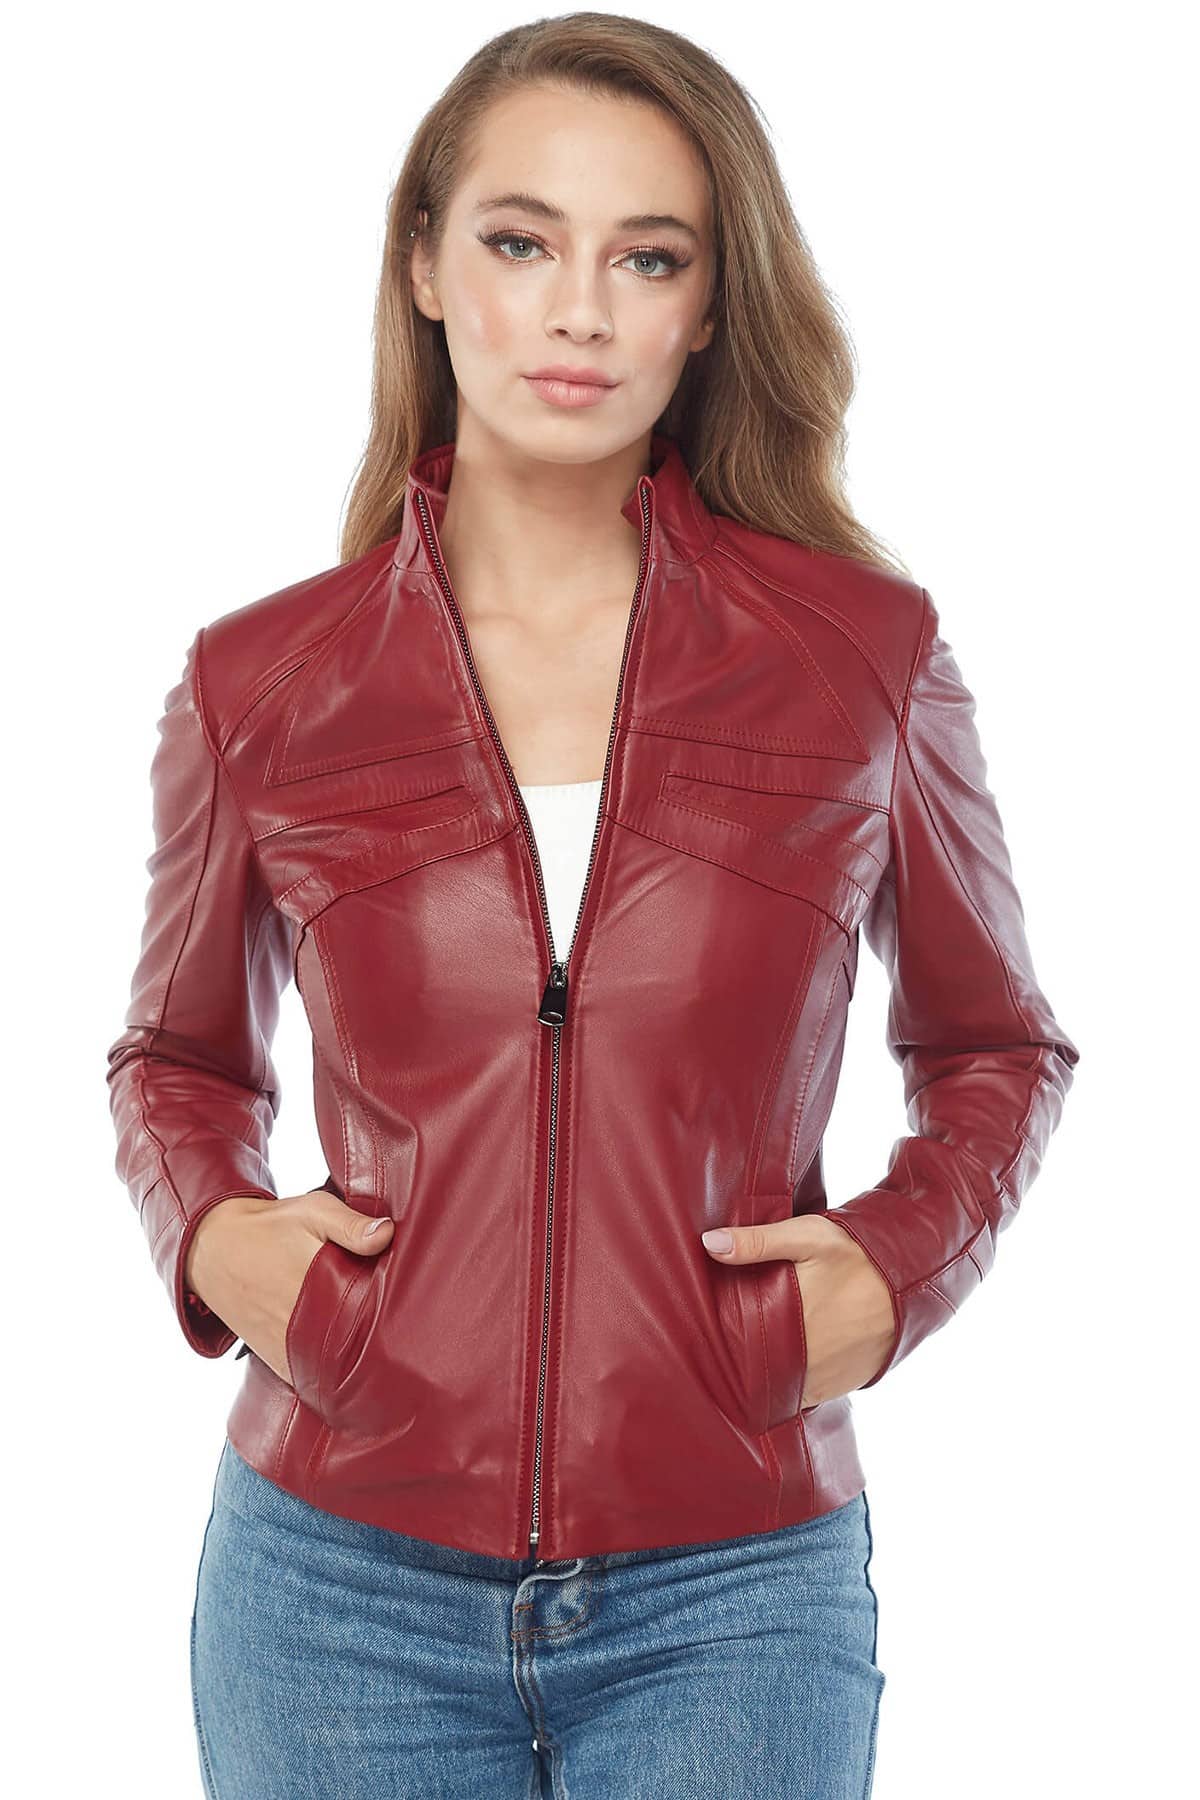 You've Searched for Womens Real Red Leather Jacket